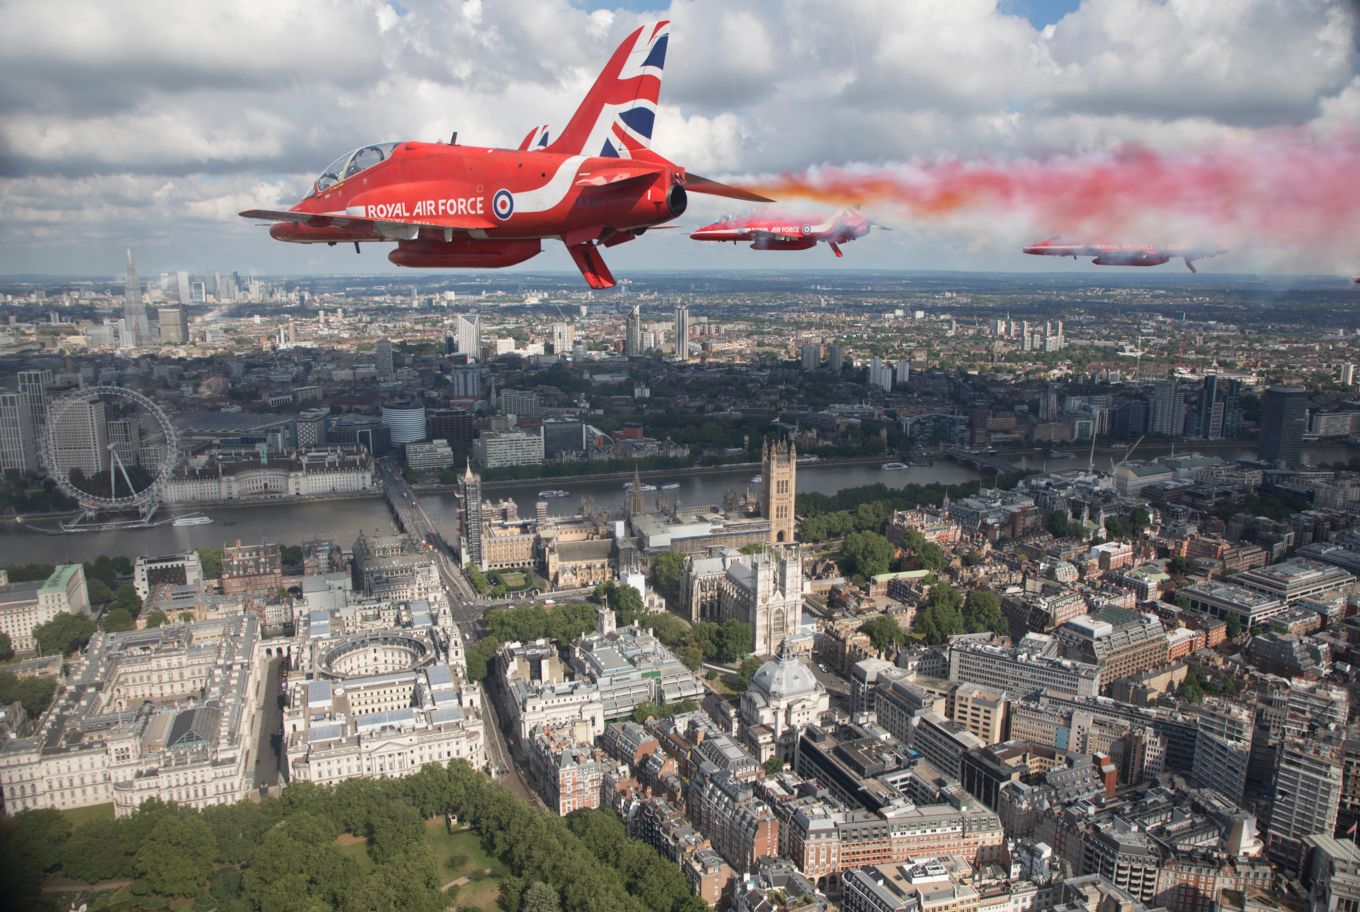 London was the venue for the second flypast of the day. Image by Corporal Adam Fletcher.